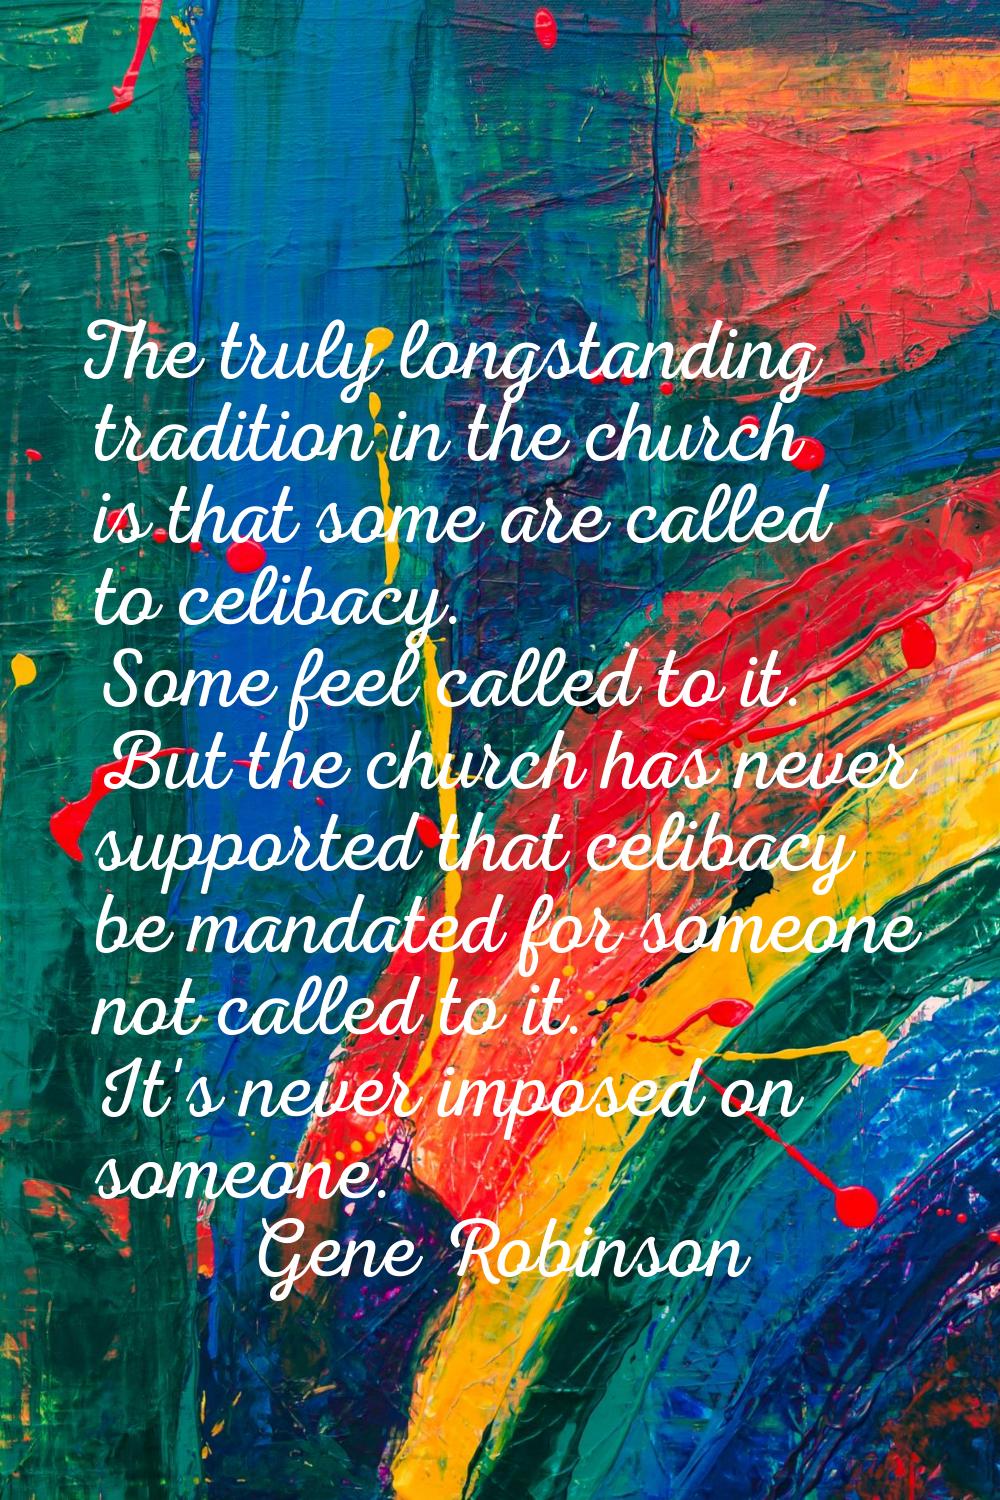 The truly longstanding tradition in the church is that some are called to celibacy. Some feel calle